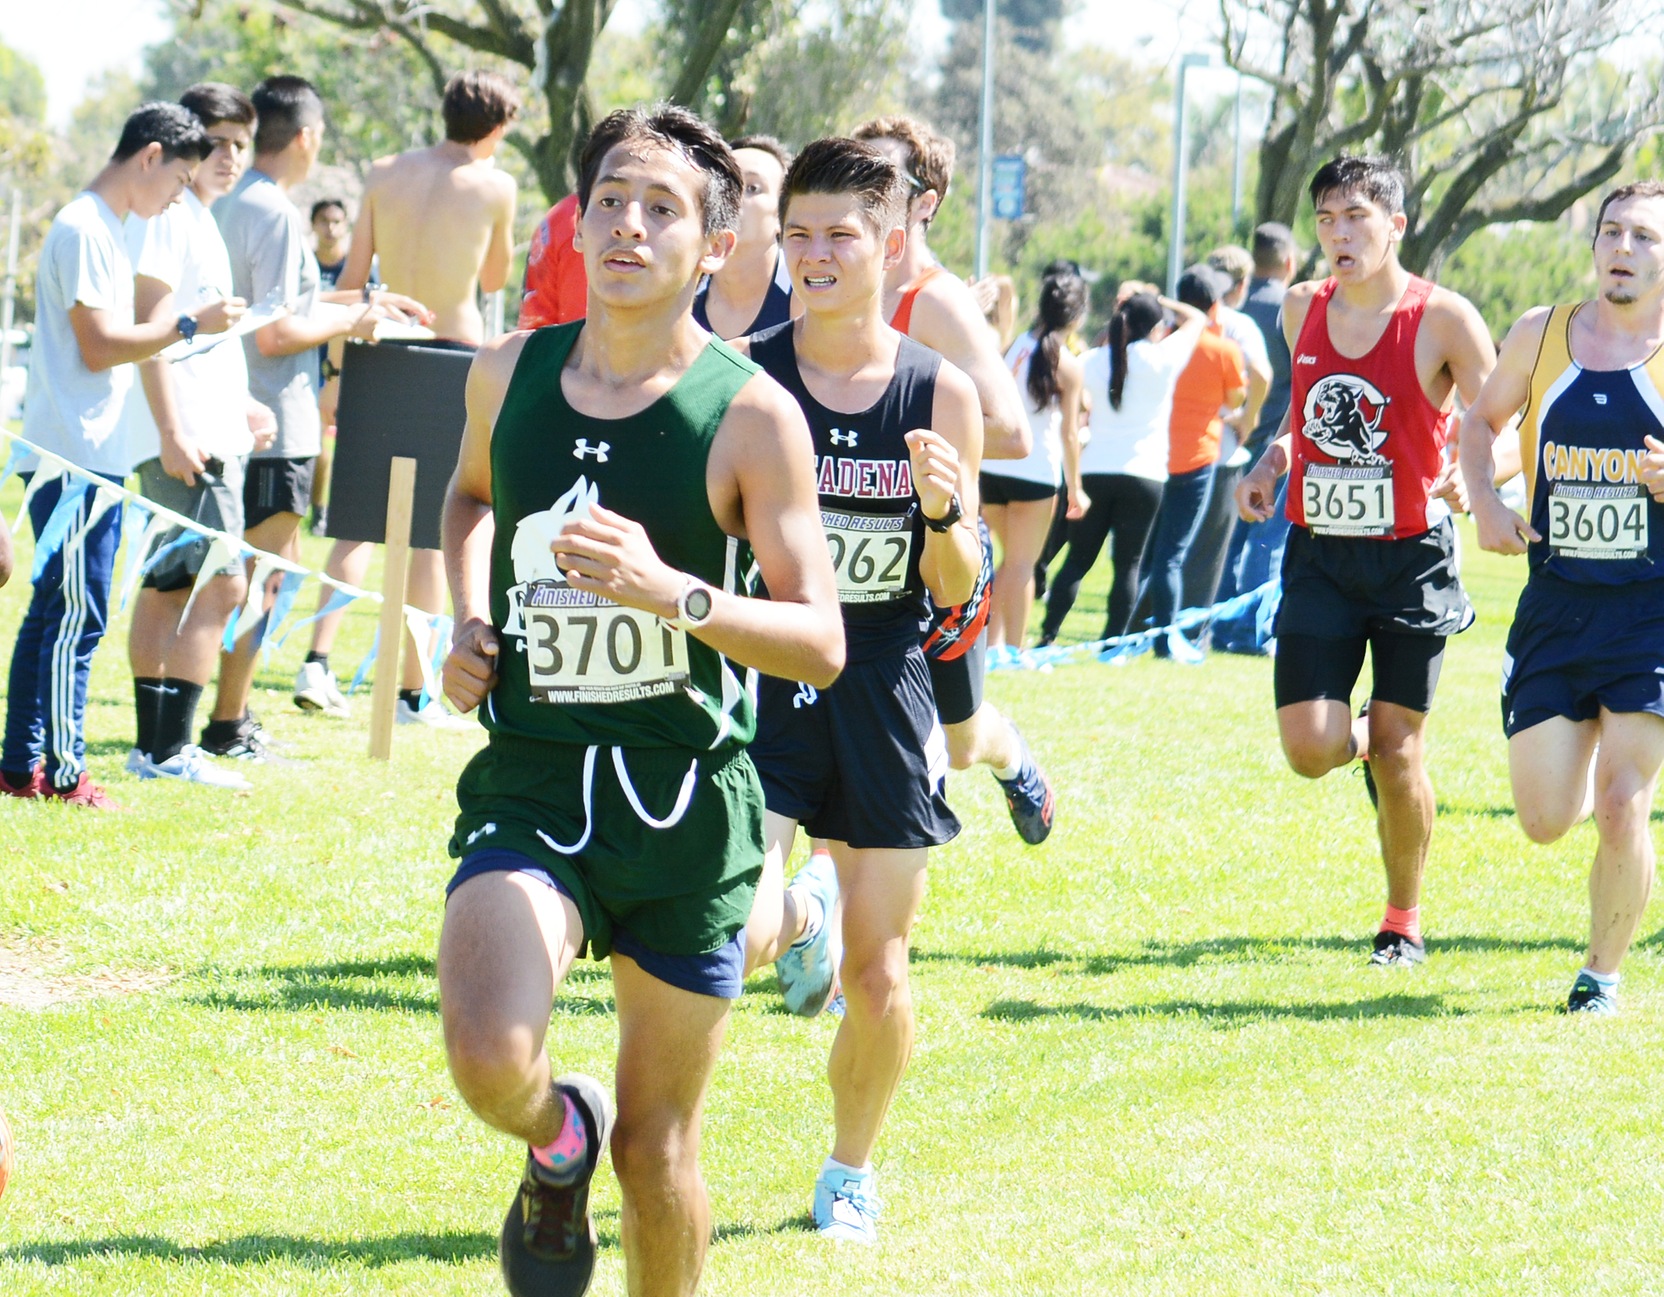 East L.A. College freshman Daniel Morales competes in the CCCAA Cross Country State Championships, Saturday, Nov. 17 at Woodward Park in Fresno. (Photo by Tadzio Garcia)